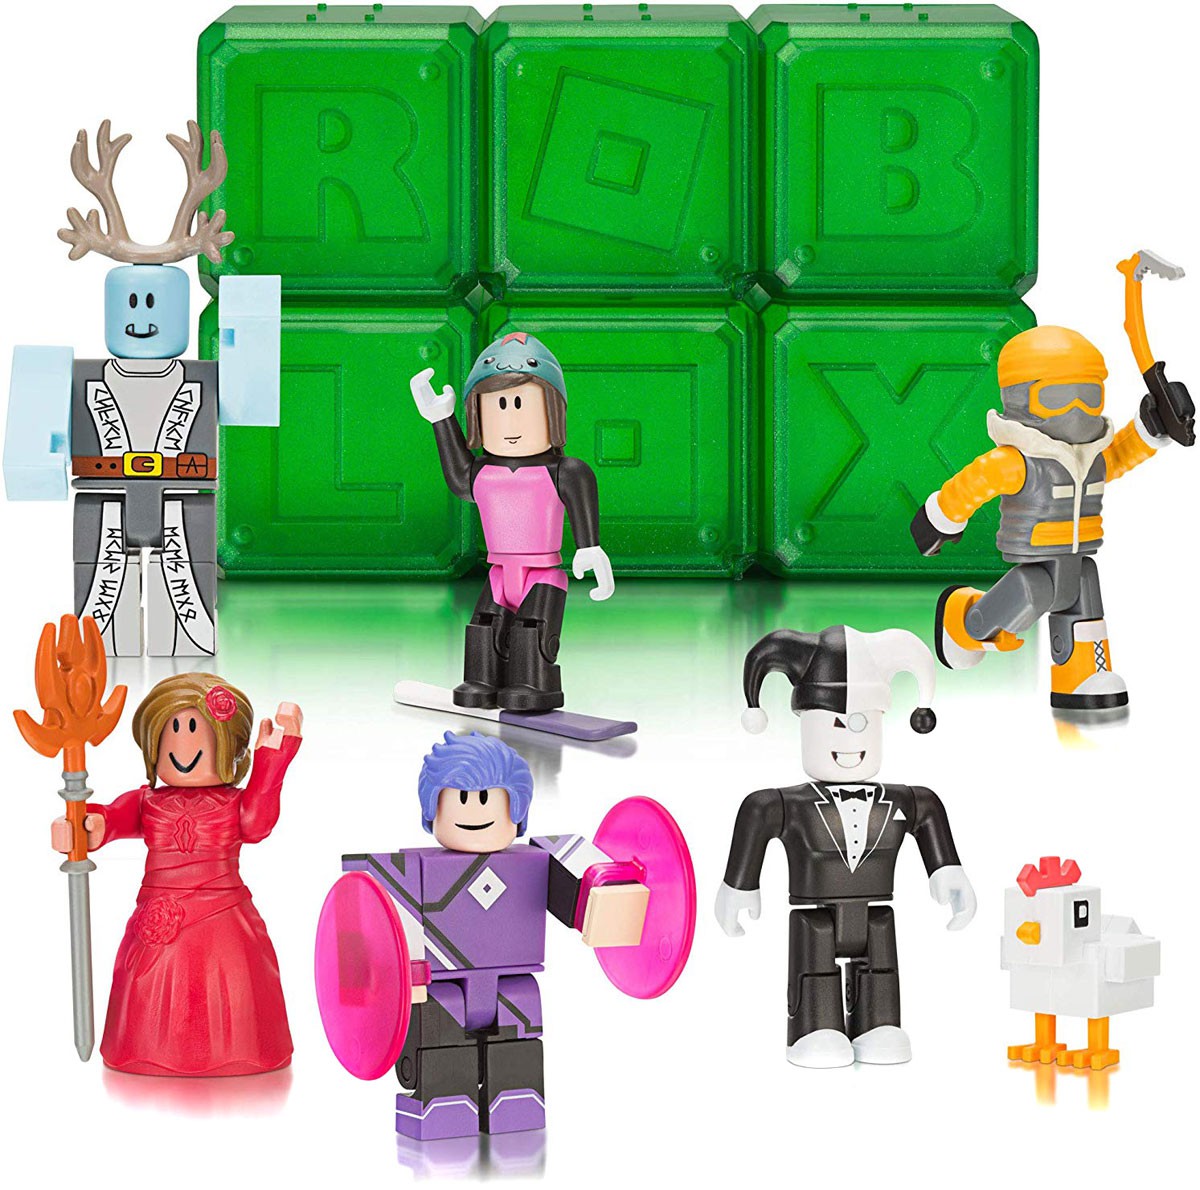 Roblox Series 4 Mystery Figure 6 Pack 191726006565 Ebay - roblox blind box series 4 assorted mystery figures 1